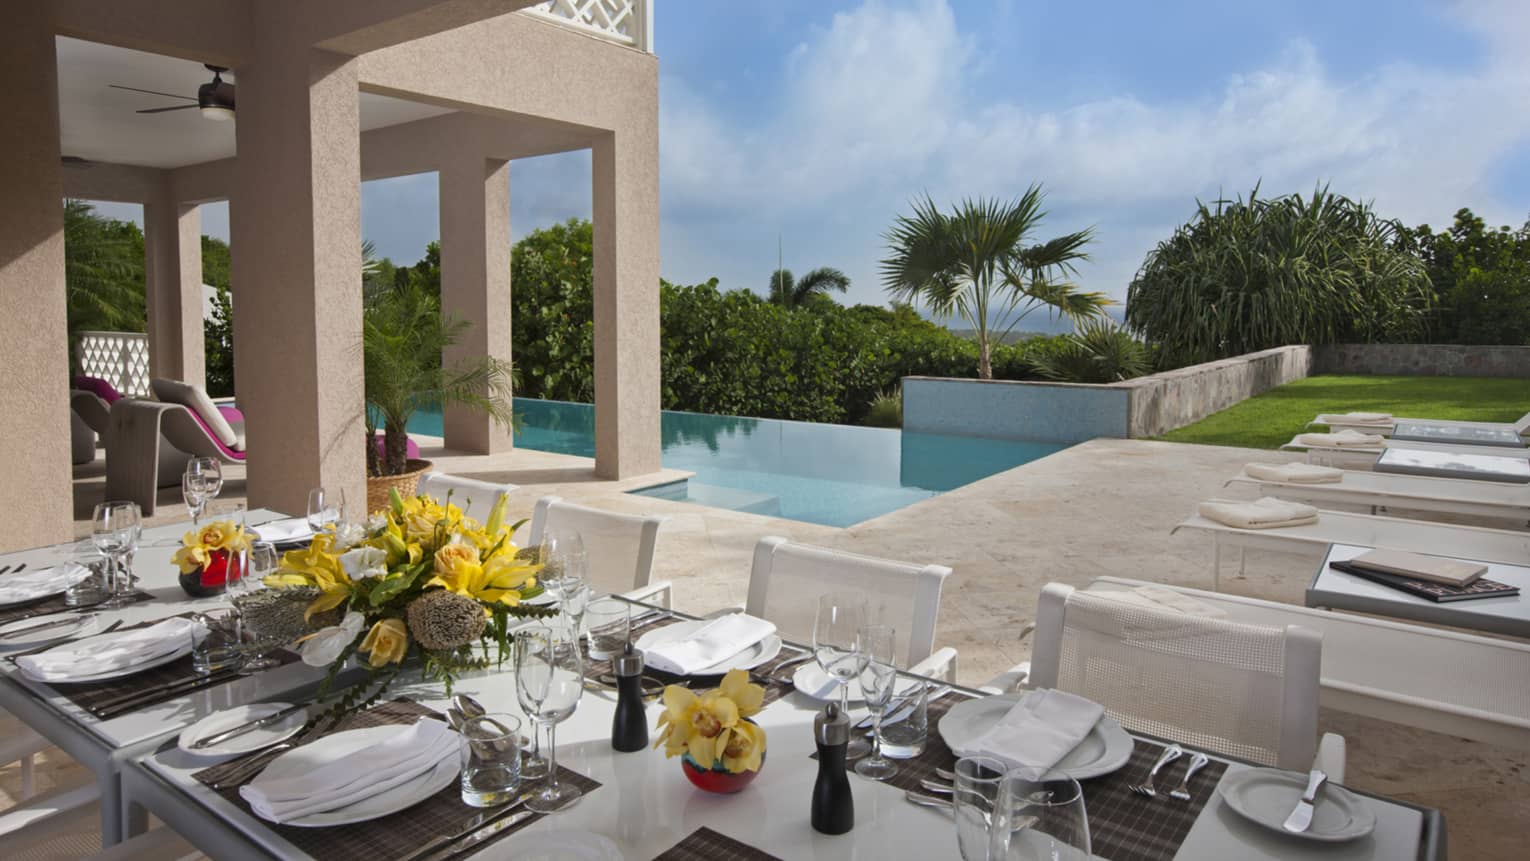 Formal dining table set with dishes, flowers on residence villa patio by pool